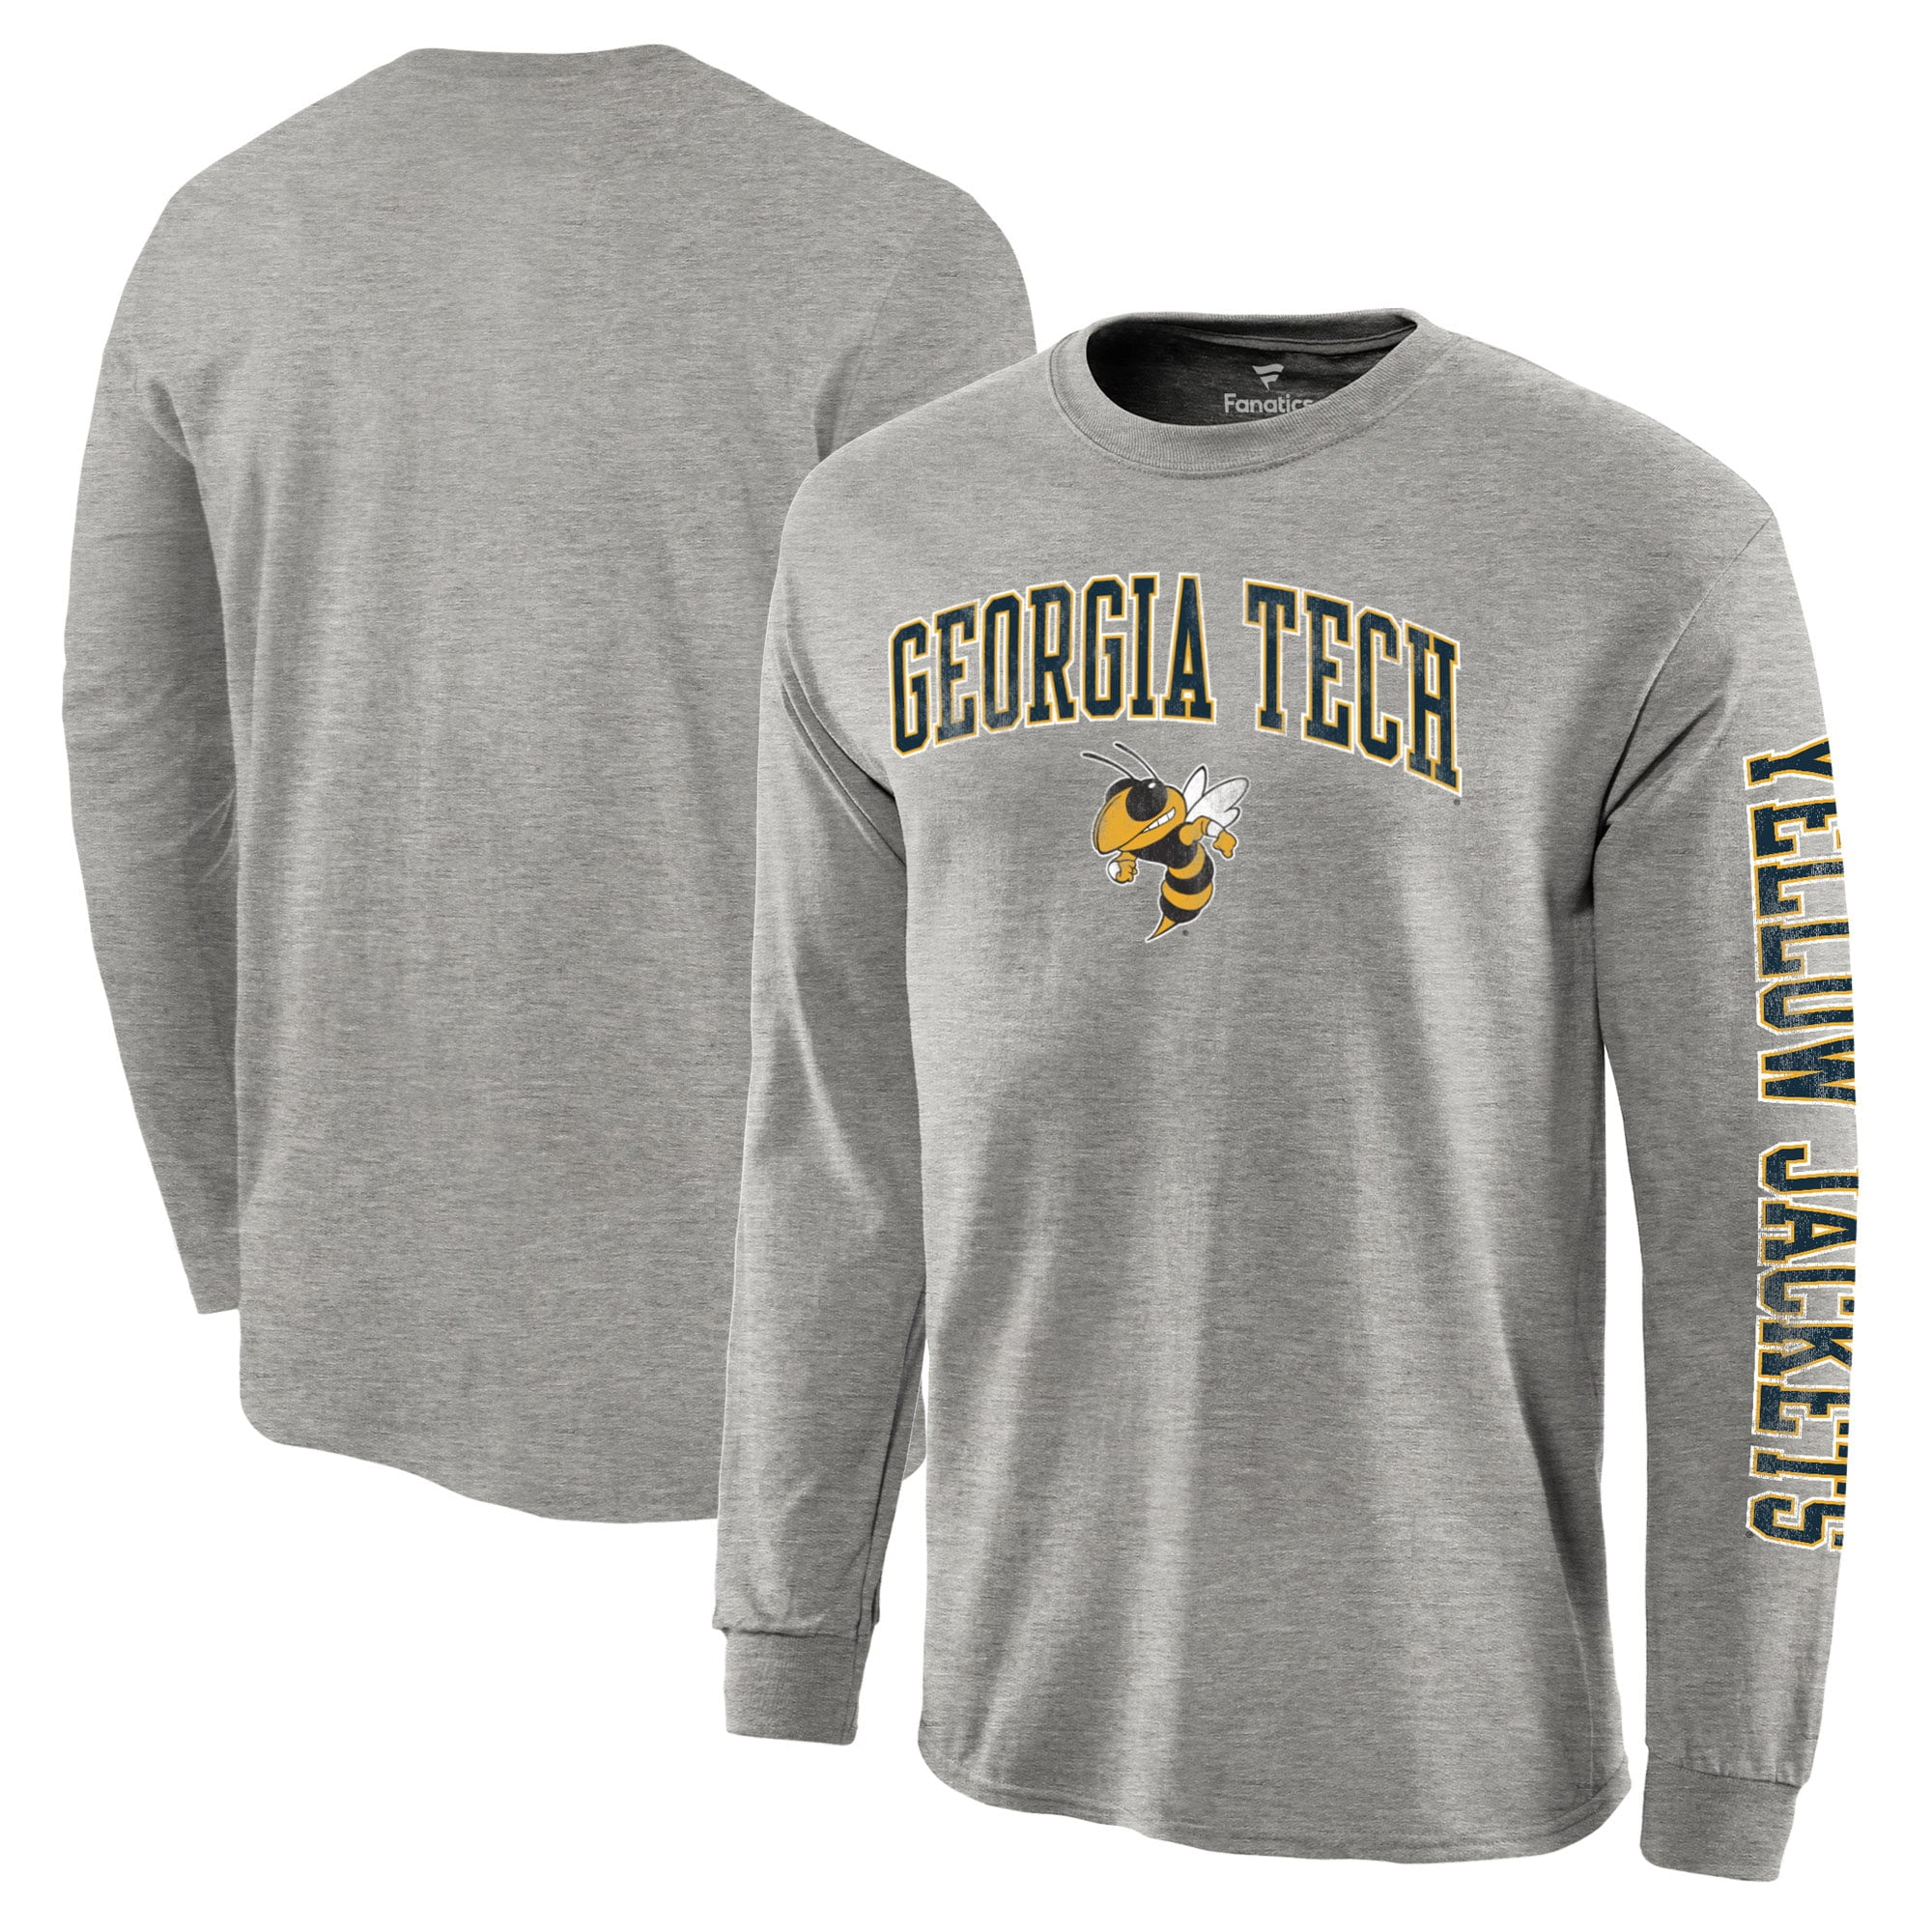 Top of the World NCAA Mens Tri-Blend Long Sleeve Gray Heather Distressed Mascot Arch T 